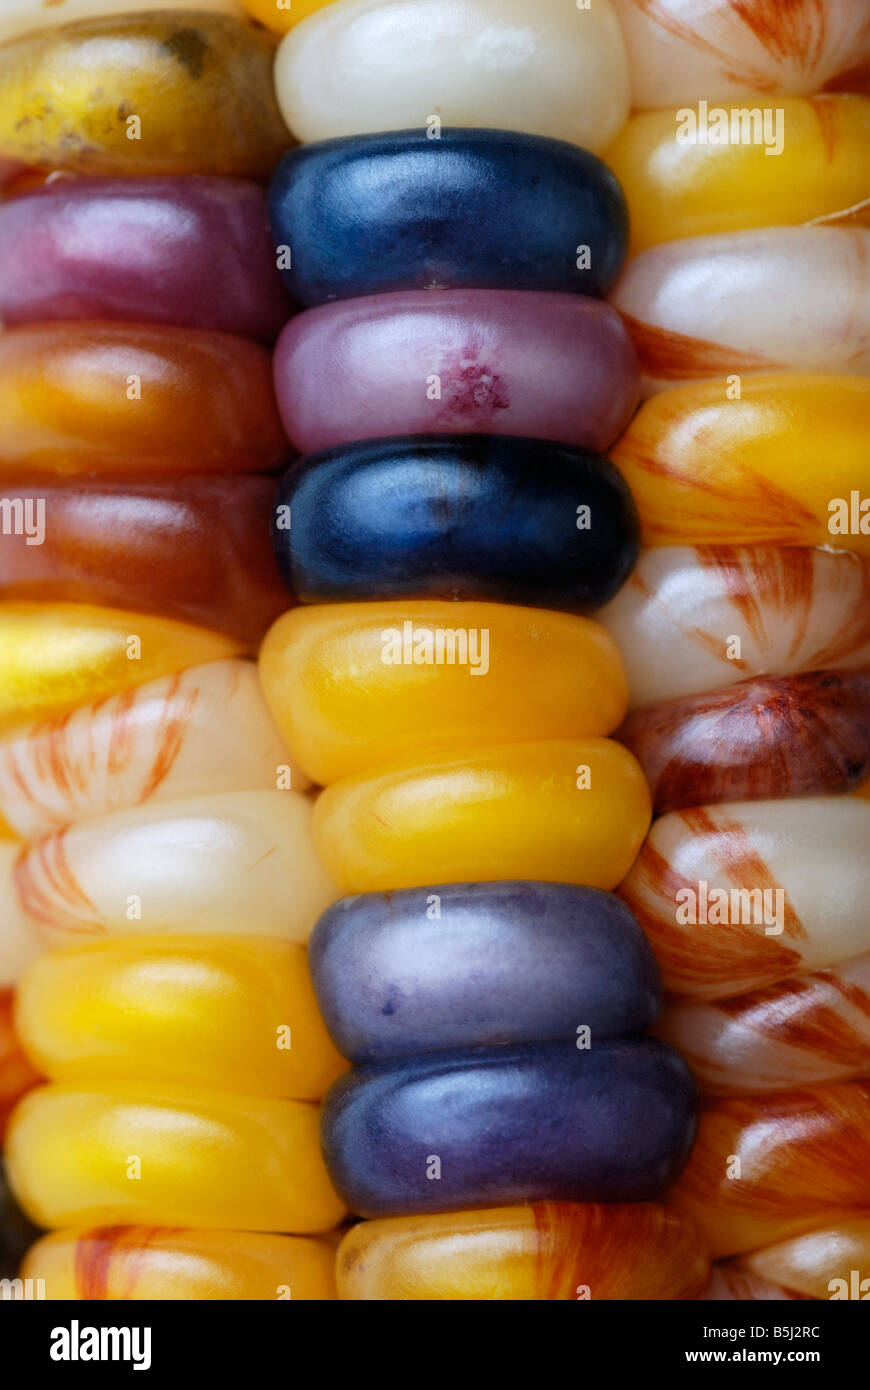 Colorful colourful Indian corn, maize, close-up Stock Photo